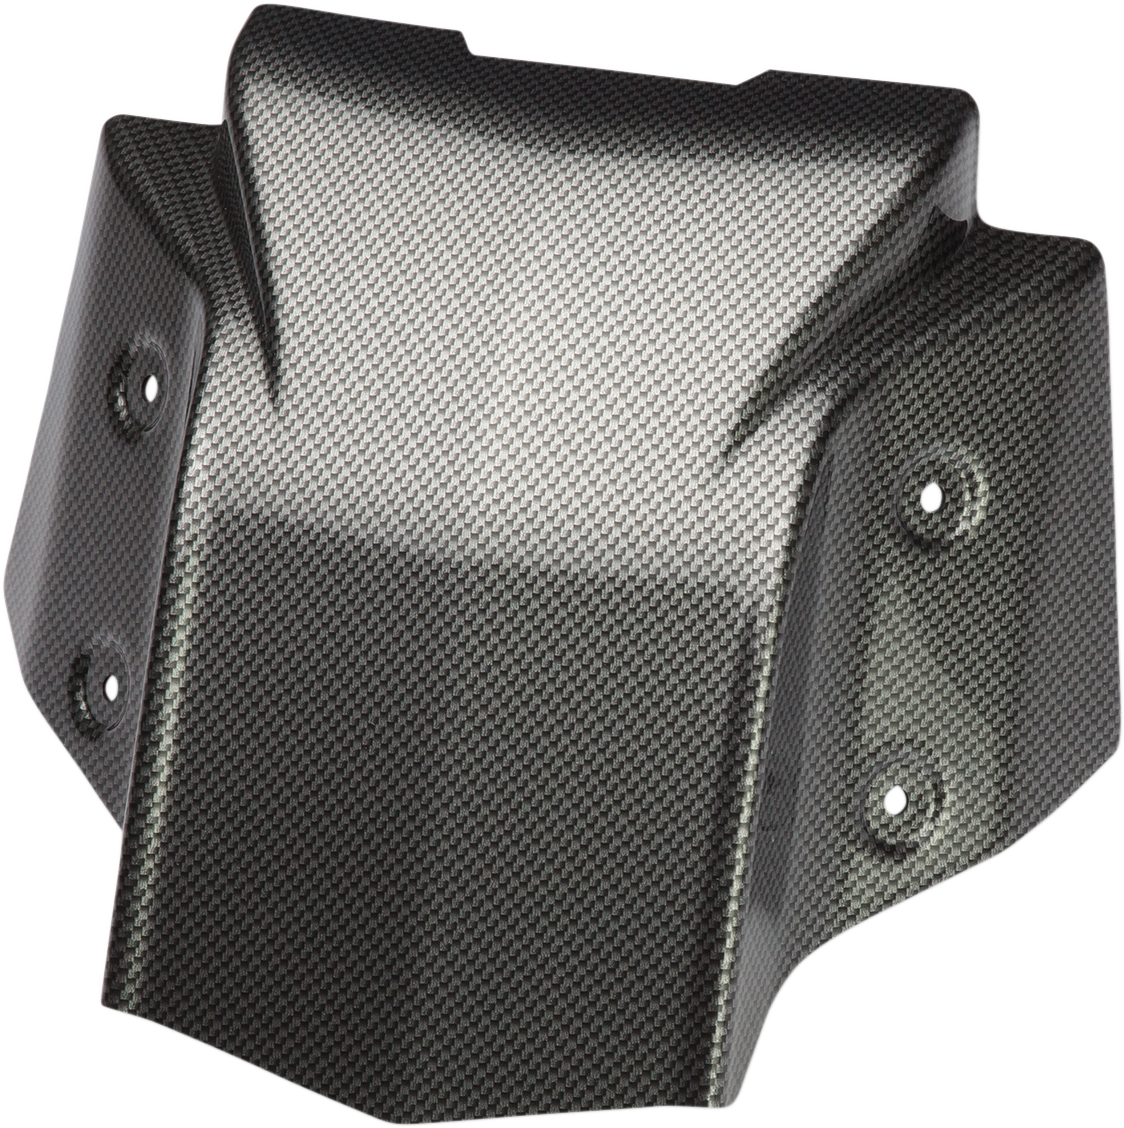 MAIER Intake Cover - Black Carbon 19037-30